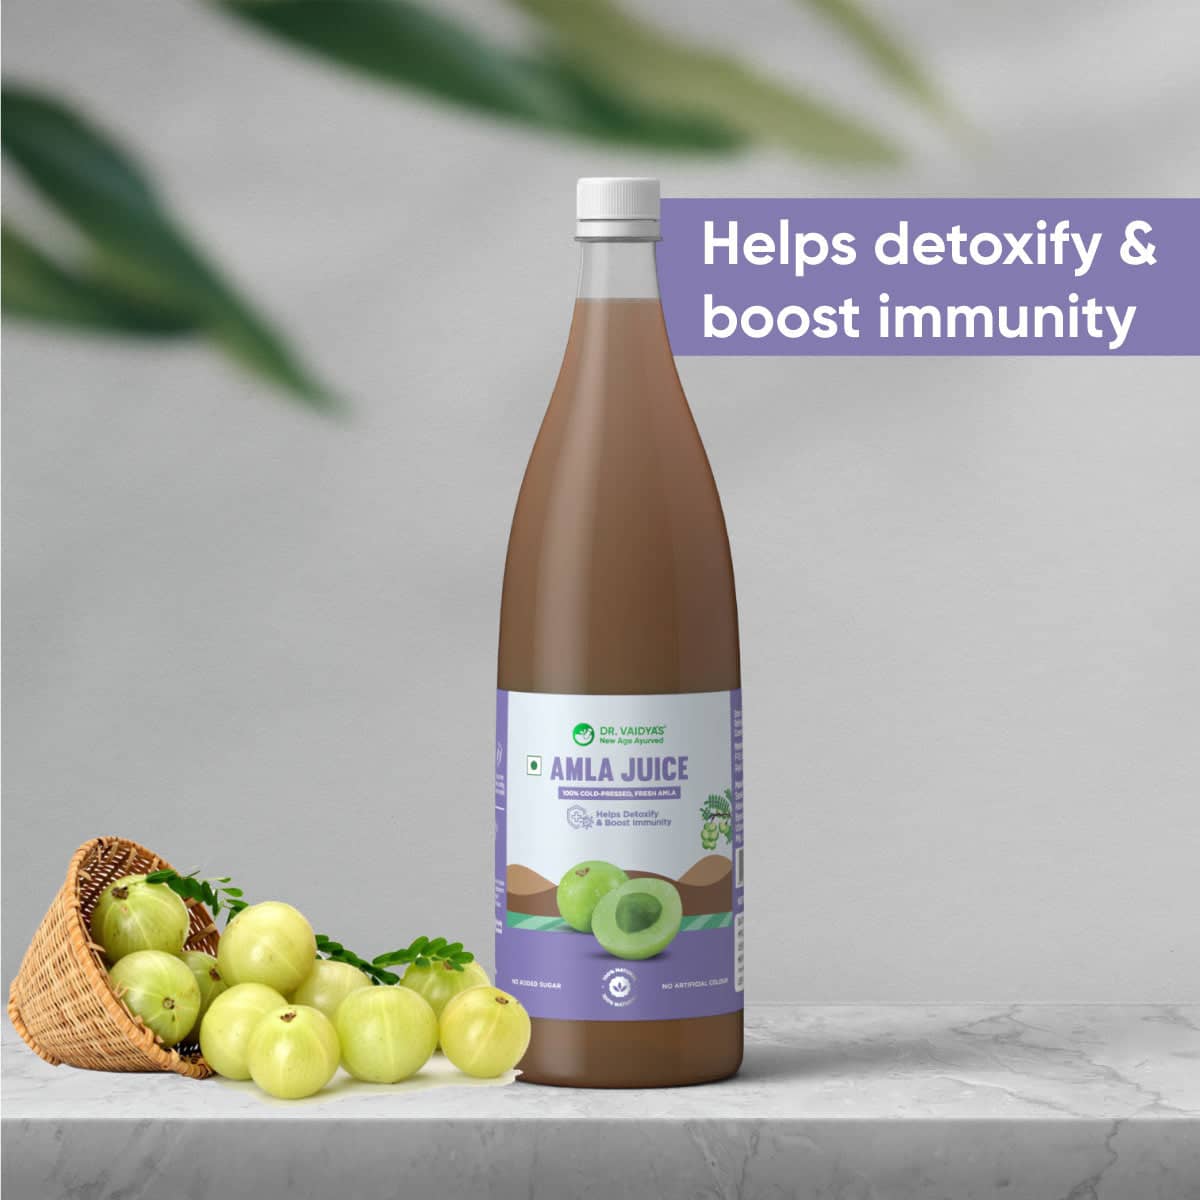 Amla Juice: For healthy liver, hair & skin and improved sugar & energy levels